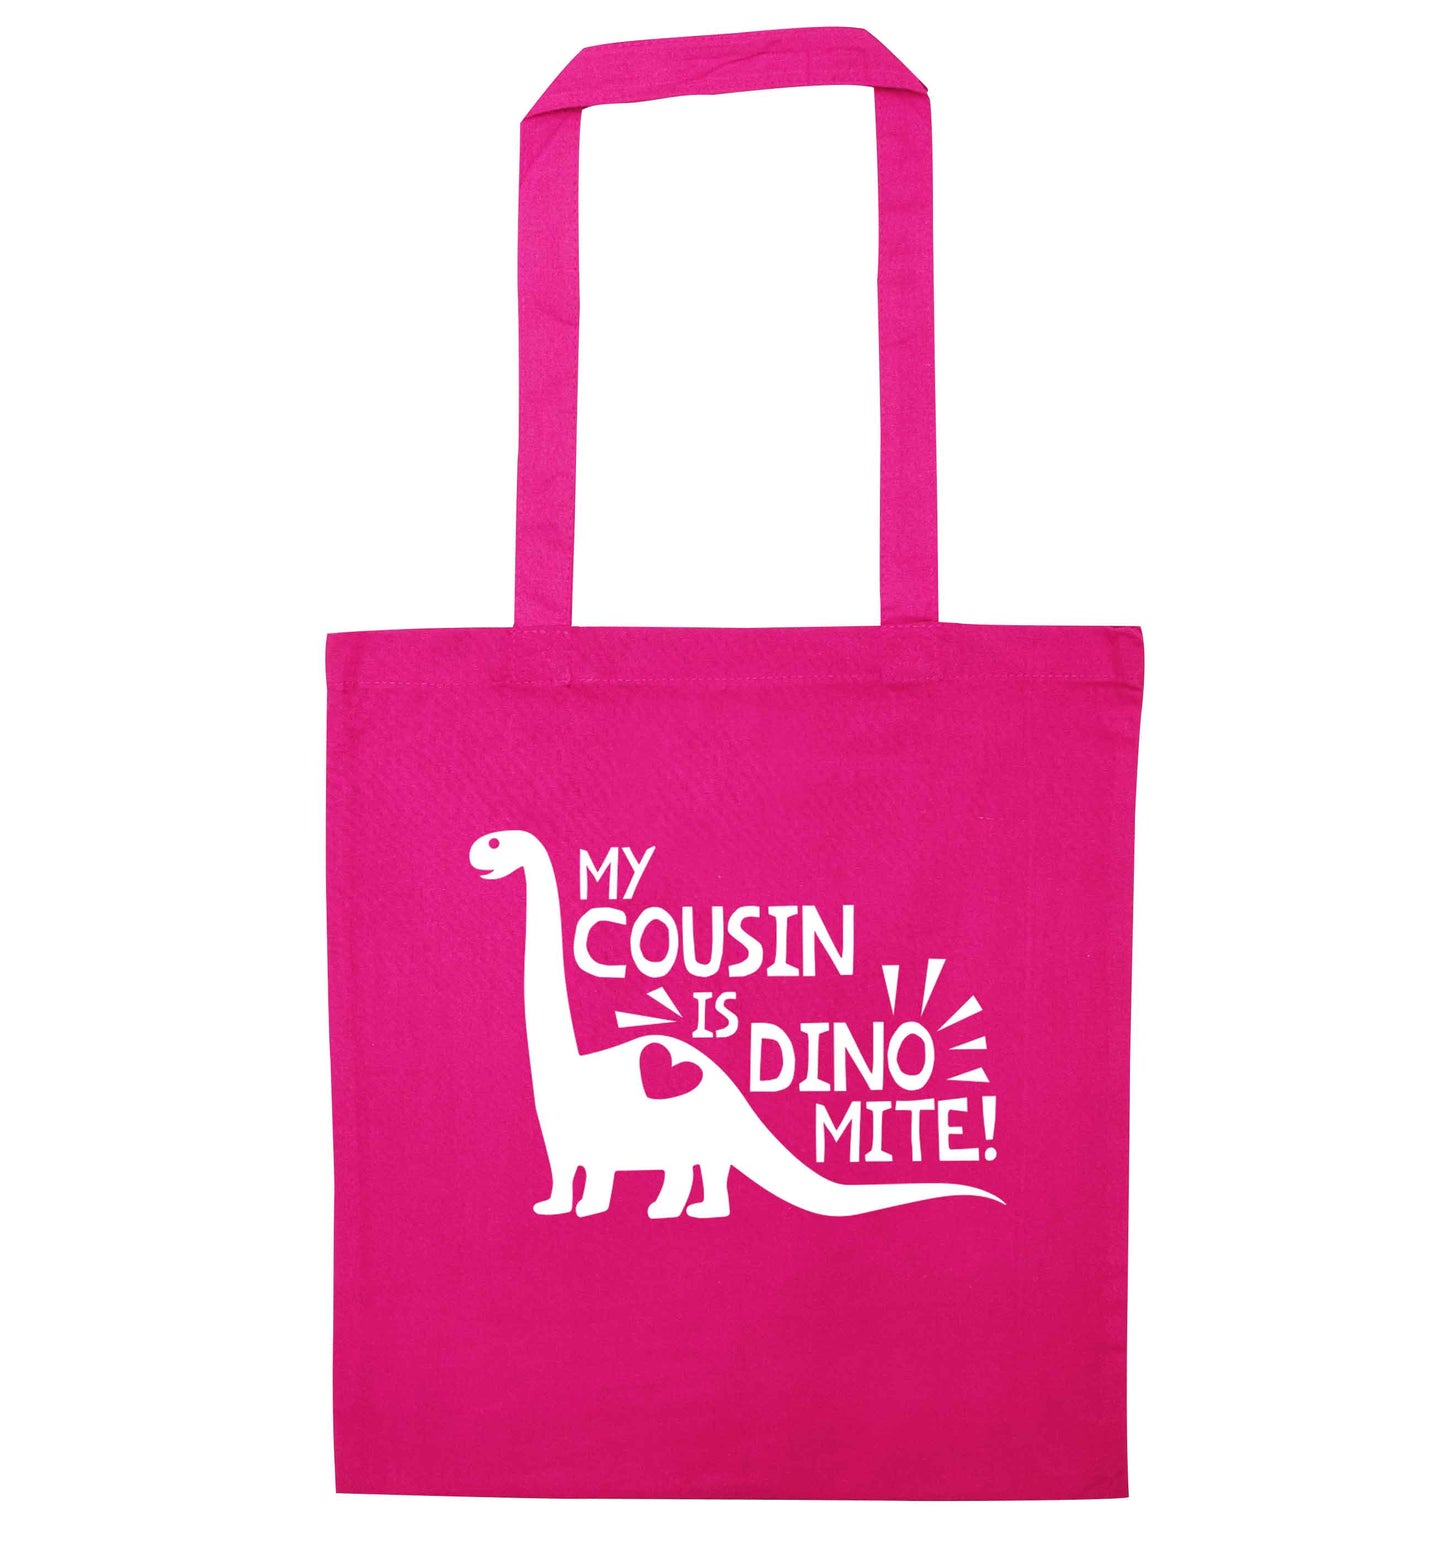 My cousin is dinomite! pink tote bag